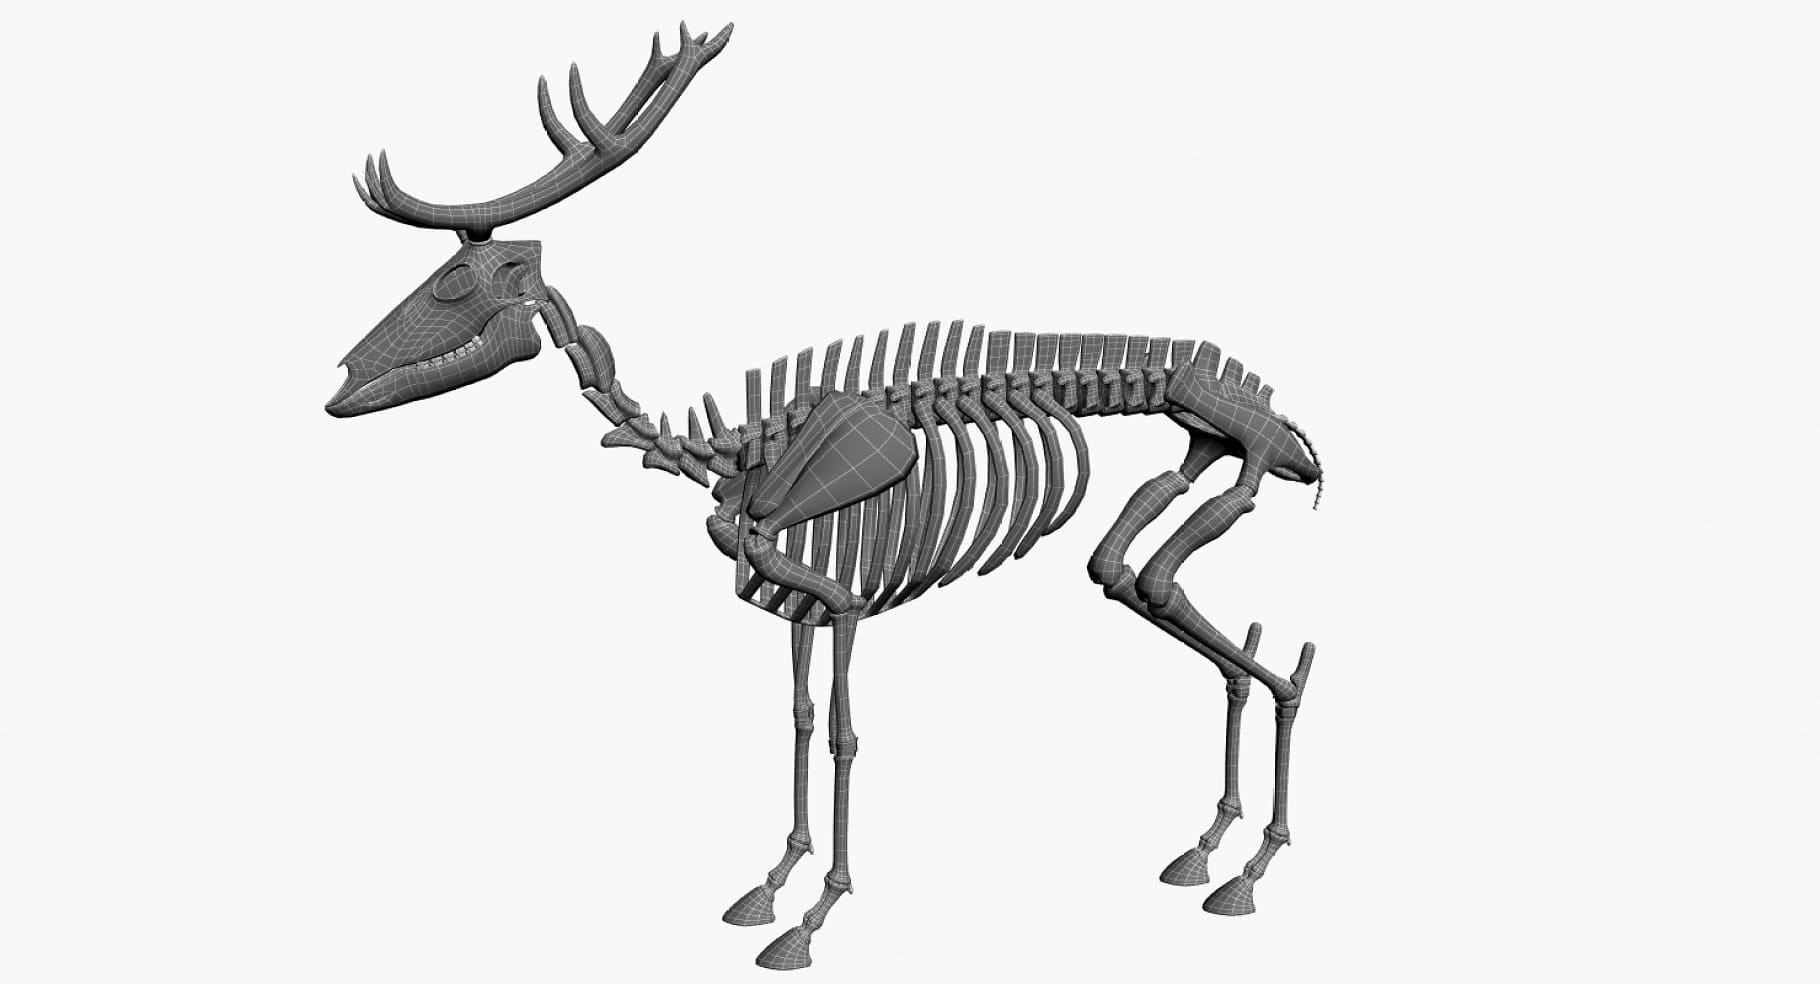 Image of a dark gray deer skeleton with a white drawing on it.